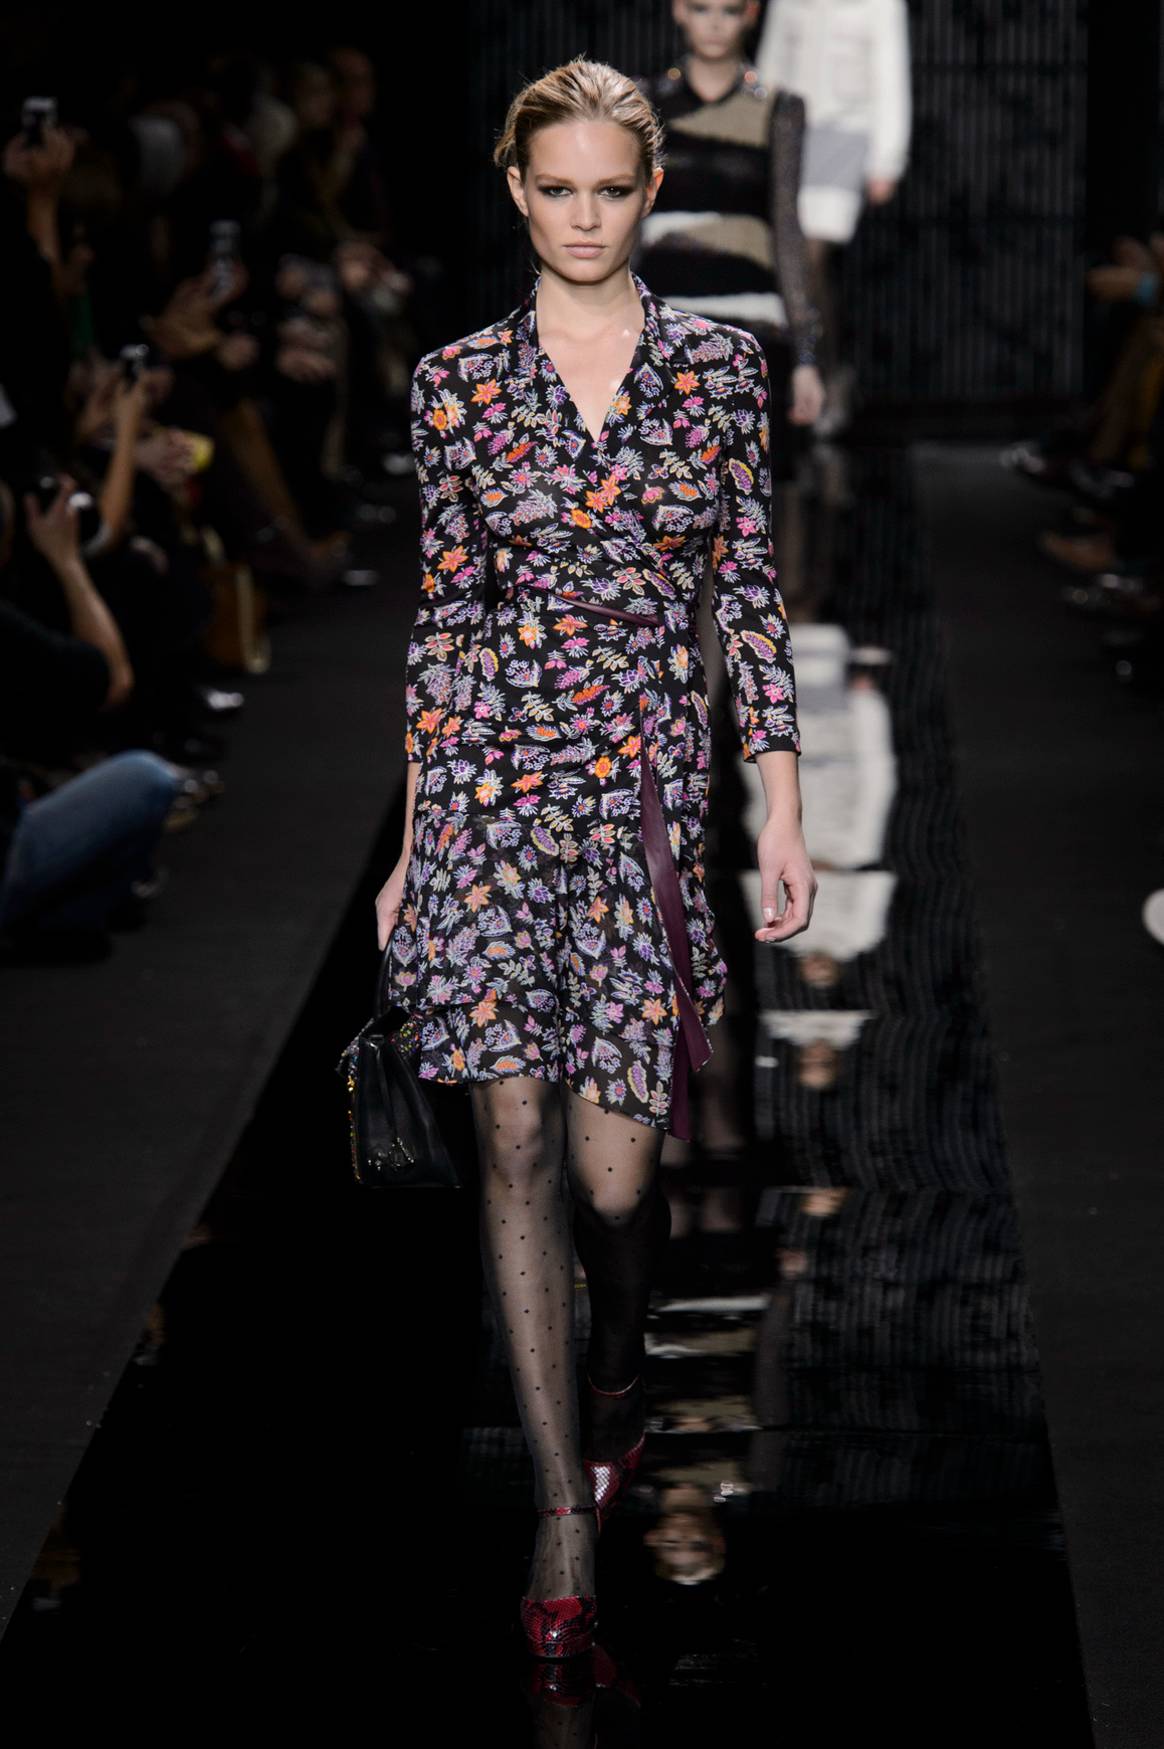 One of the wrap dresses from the DVF brand. Credit: Launchmetrics Spotlight, DVF FW15.